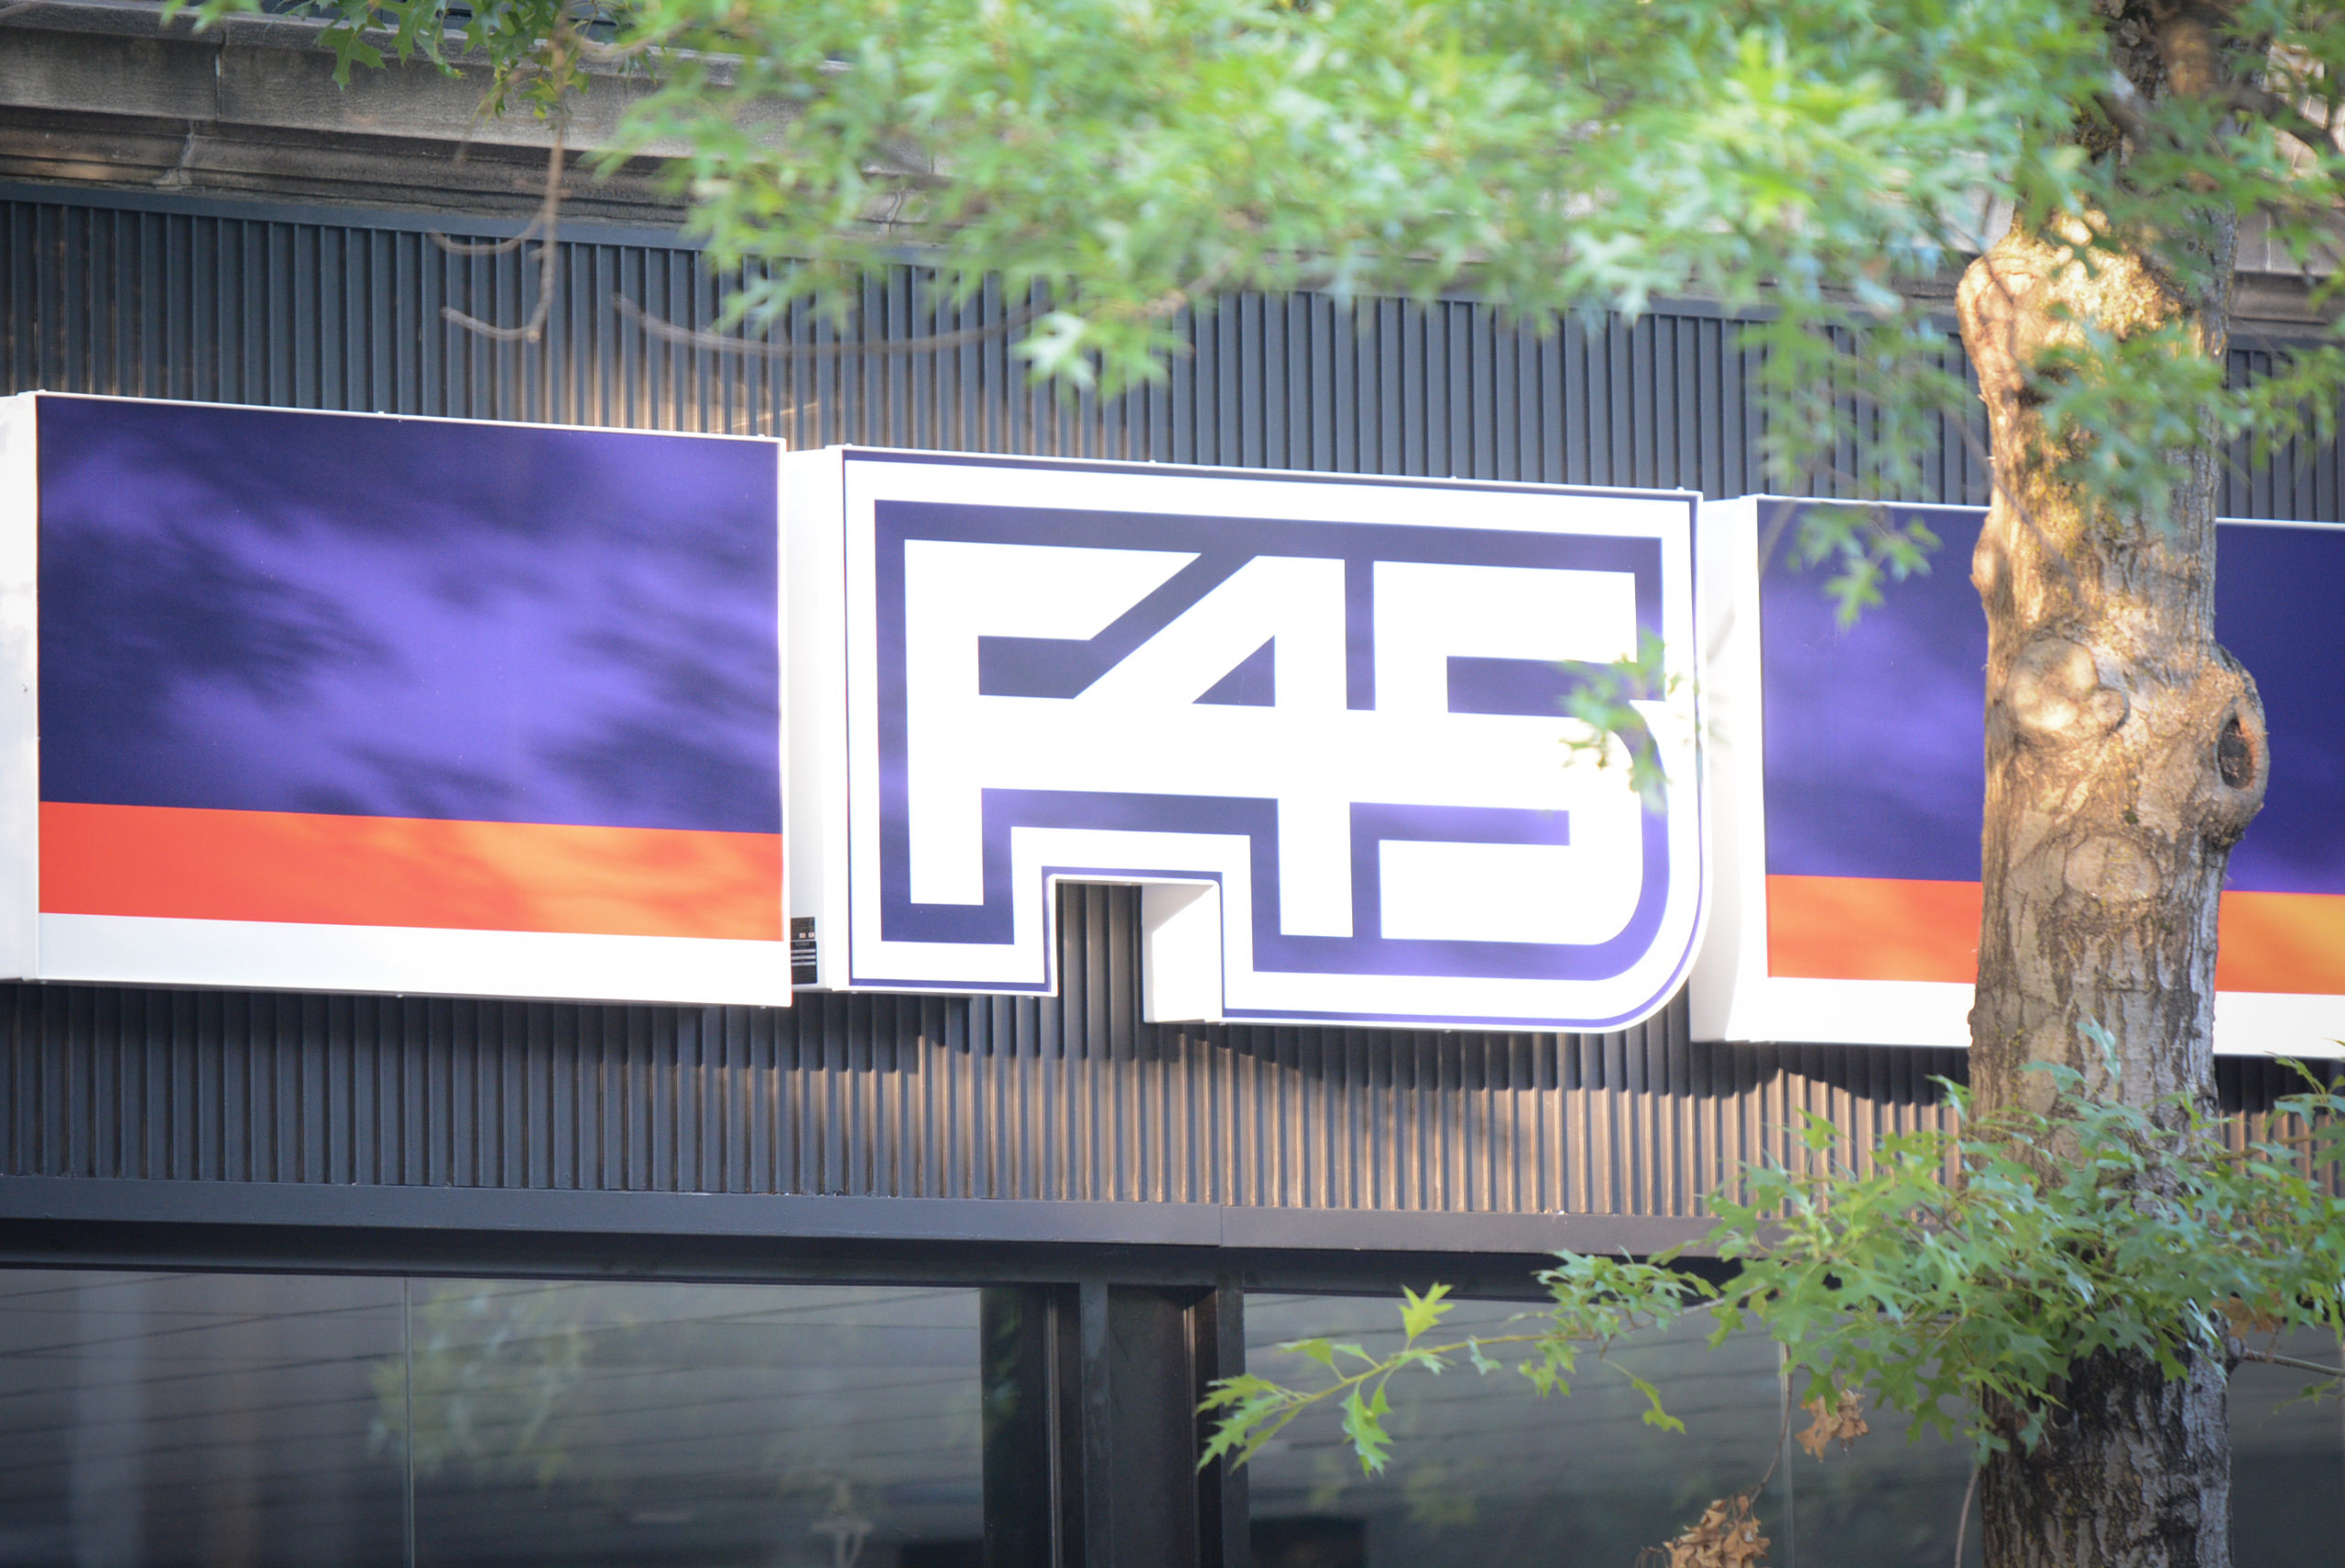 F45 – or "Function 45" – Fitness is almost ready to open its Great Neck Plaza location. (Photo by Janelle Clausen)